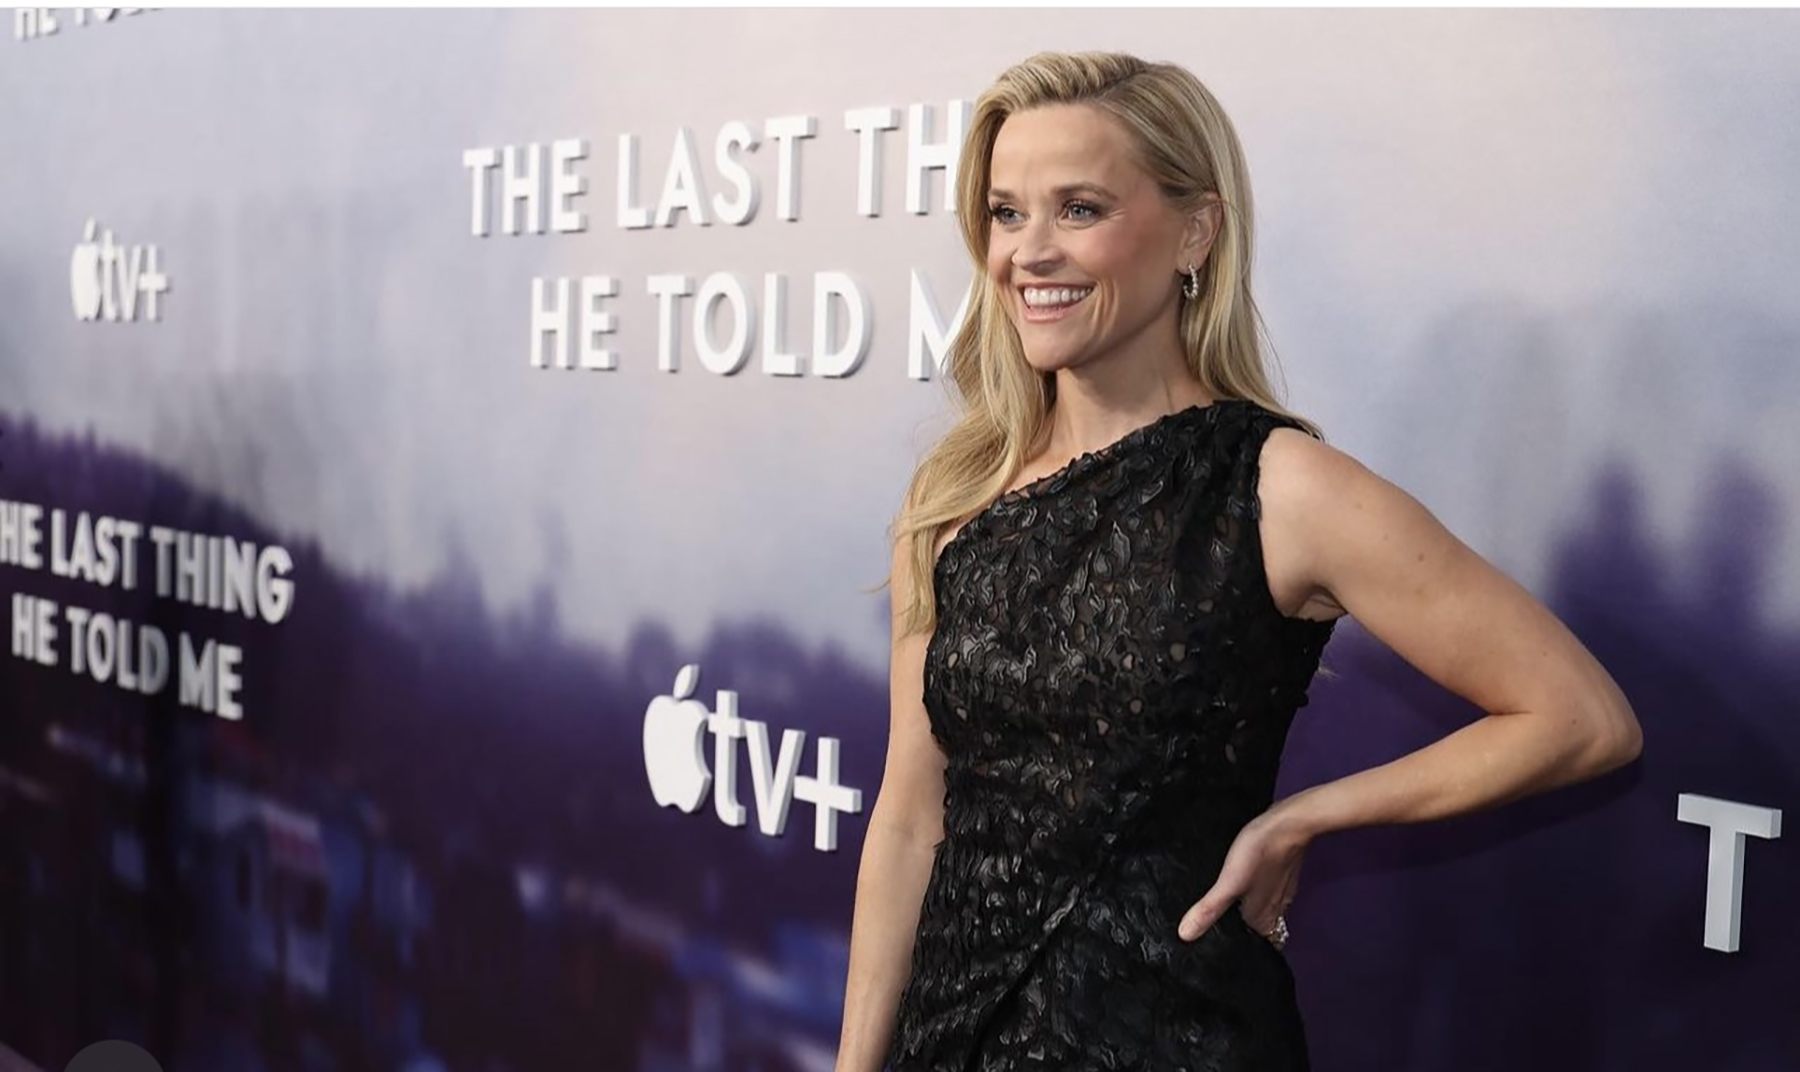 Reese Witherspoon at the premiere of "The Last Thing He Told Me"